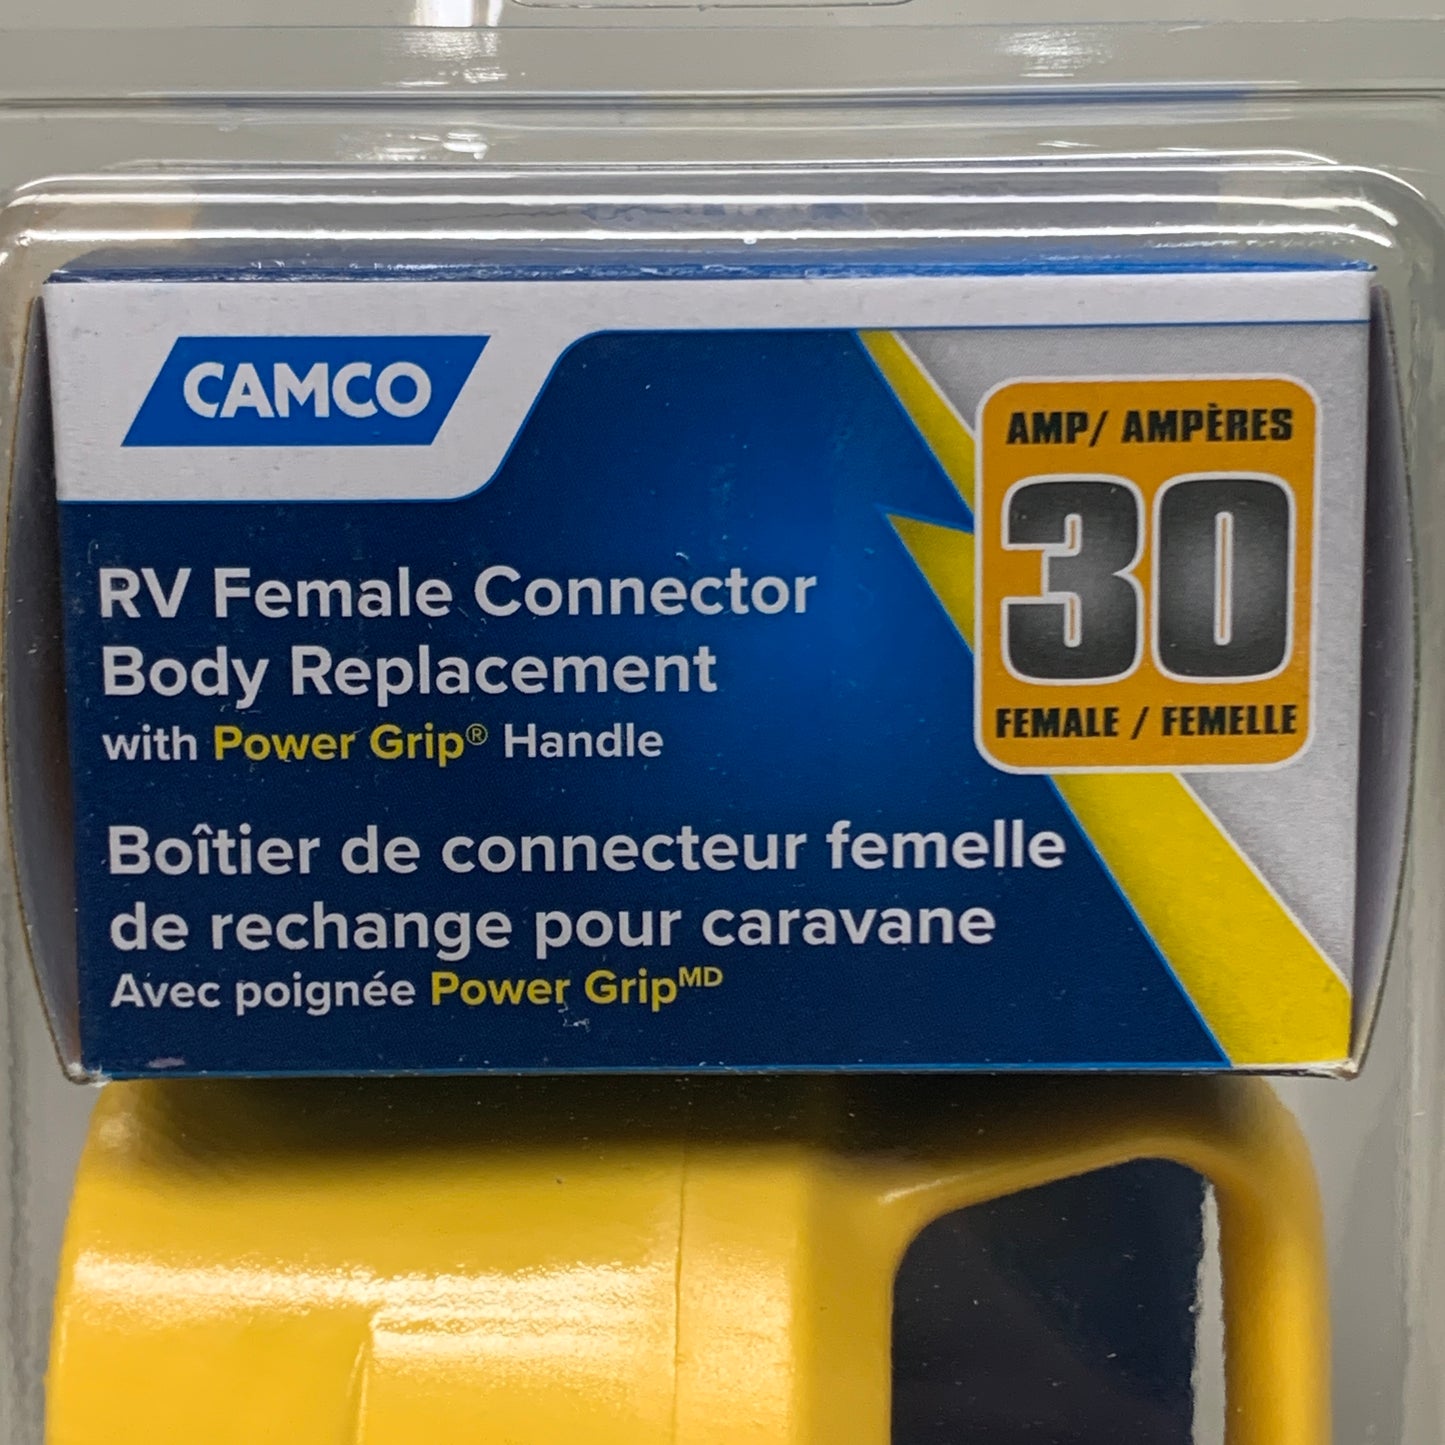 CAMCO RV Female Connector Body Replacement W/ Power Grip Handle 30 AMP 55343